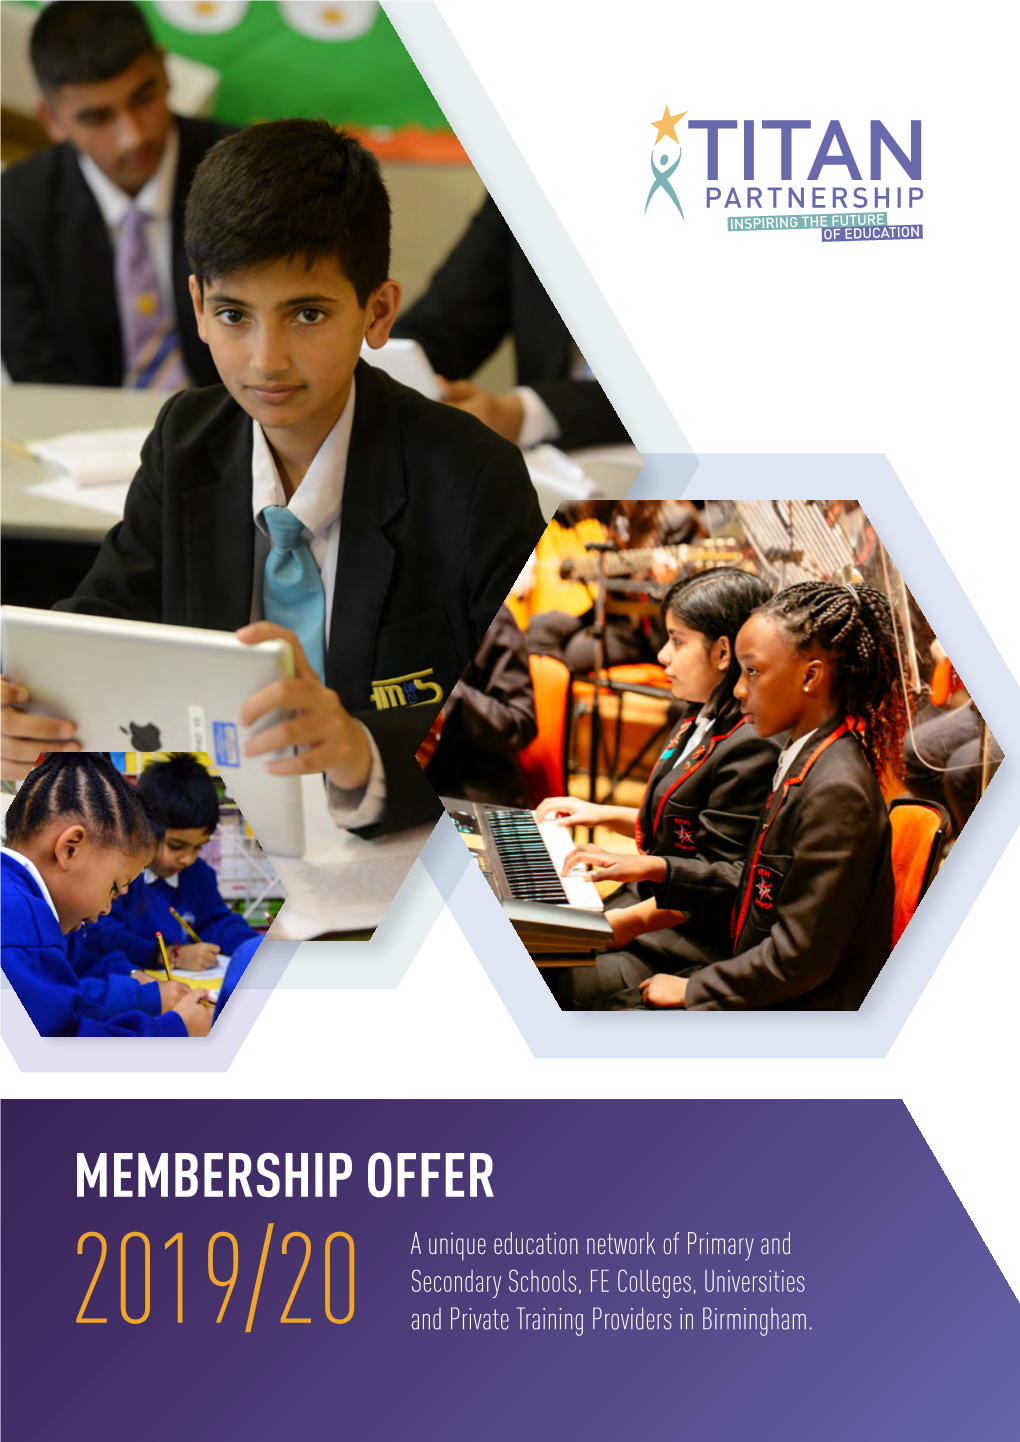 MEMBERSHIP OFFER a Unique Education Network of Primary and Secondary Schools, FE Colleges, Universities 2019/20 and Private Training Providers in Birmingham